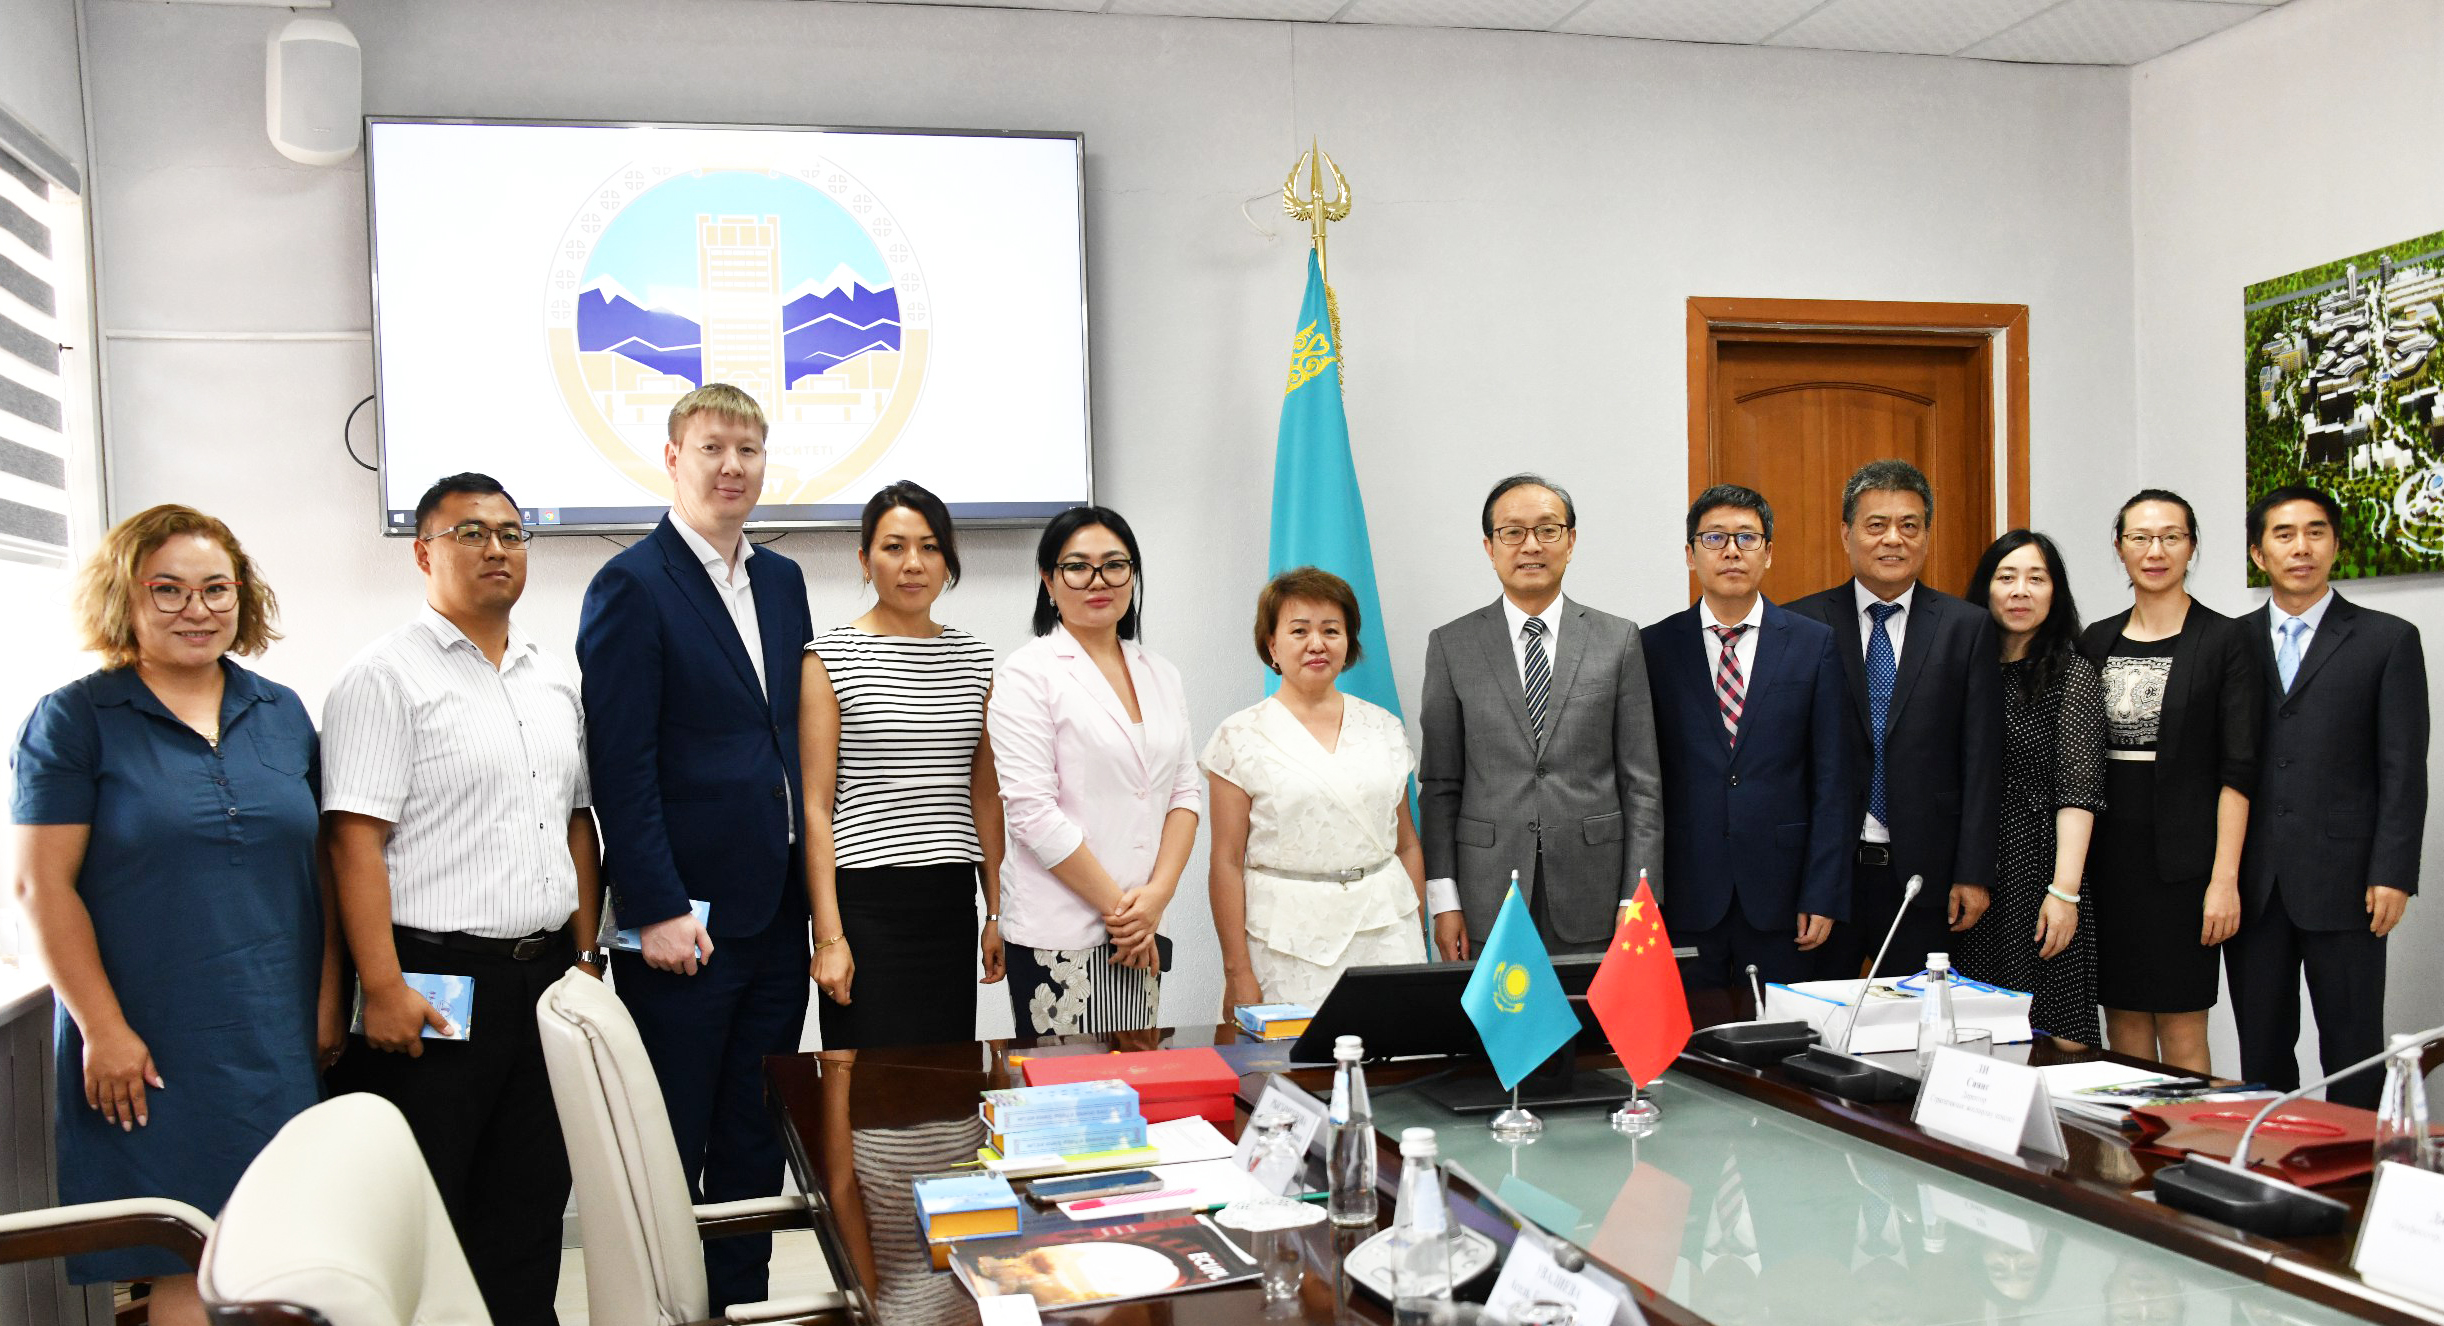 KazNU and ECUPL will jointly implement legal research projects